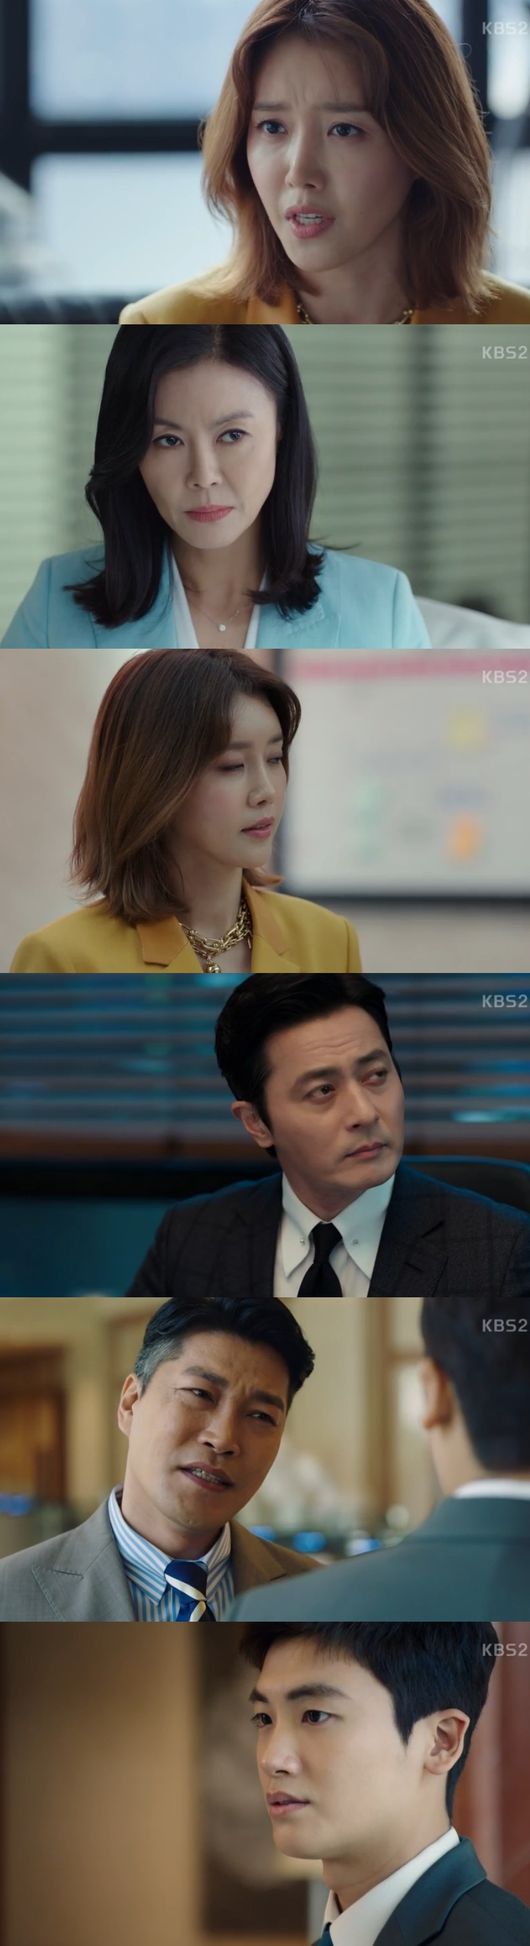 Chae Jung-an saved Jang Dong-gunOn KBS Suits broadcast on the 17th, Kang Suk was called to the prosecution.Ha Yeon said, This is not a trial, but our lawyer is aware that he attended as a reference.The prosecutor was angry when Hayeon and Kang Suk lightly responded to the investigation, saying, Do you two look like this place is a joke? Kang Suk said, Is that possible?Its a problem with my neck...The prosecutor said, Did not you notice the illegality of Oh Byung-wook, your shooter, a few years ago?Specifically, when the son of a member of parliament was arrested for a hit-and-run, he deliberately removed important CCTV data, and even though he knew him, he did not pretend to know that he was a mentor. Hayeon exercised his right to remain silent, and the prosecutor warned, It is easier to hit a lawyer at a law firm than to hit Oh Byung-wooks neck.Kang Suk visits the misjudgment office and advises accept the charges and take off your clothes; however, the misjudgment attorney was summoned by the prosecution and then charged Kang Suk with all charges.In the end, he gives a notebook to Ha-yeon, who records the corruption of the prosecutor. I knew that he was committing corruption, and I recorded it because I thought this day would come.Ha-yeon went to the prosecutors office and handed out his notebook and said, Acknowledging the charges and taking off your clothes. The lawyer should erase it to your life. Eventually, the prosecutor admitted the charges and took off his clothes.Ha-yeon informs Kang Suk, who was preparing to attend the trial, and Kang Suk asks, How did you do it? But Ha-yeon does not tell specific stories.Yeon Woo reveals the corruption of his client Nam Young and reveals that Nam Young has even taken the money of Kang & Ham.Yeon Woo, who was deceived by Nam Youngs representative, made a conversation with the representative, and set up the ball, became a formal lawyer after taking off the check.Suits capture